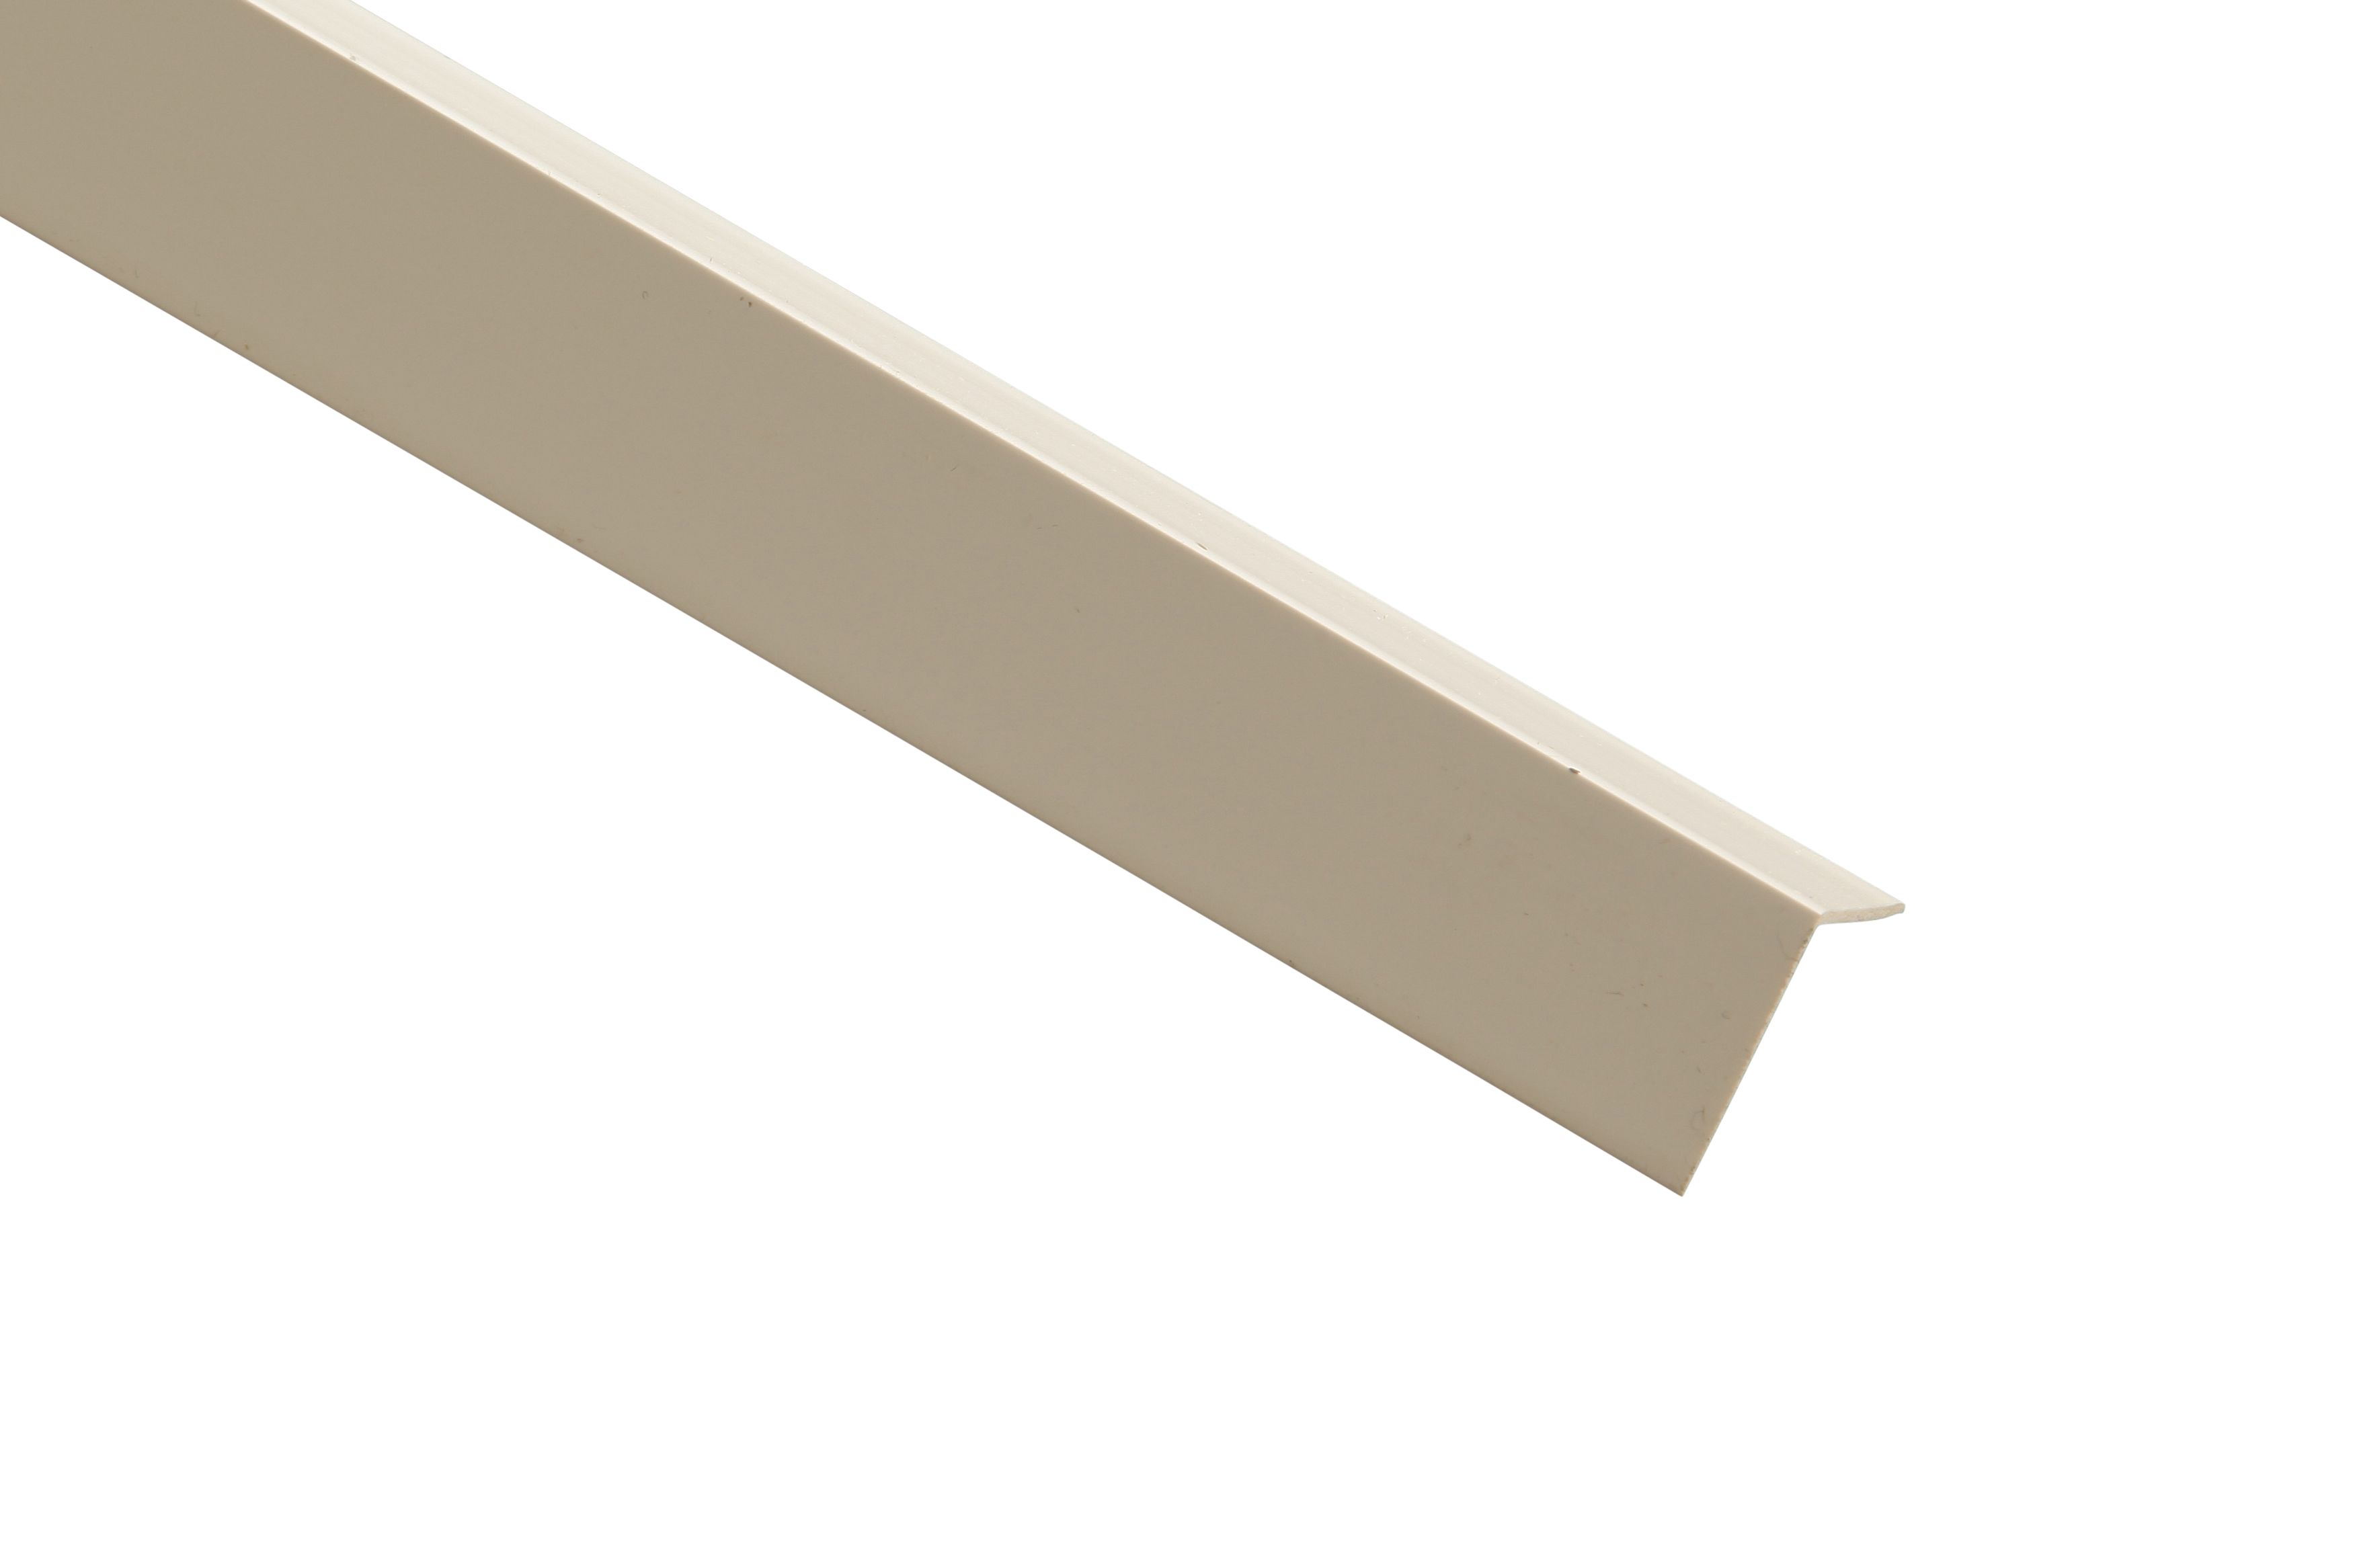 Wickes PVC Angle Moulding - 25 x 25 x 2400mm